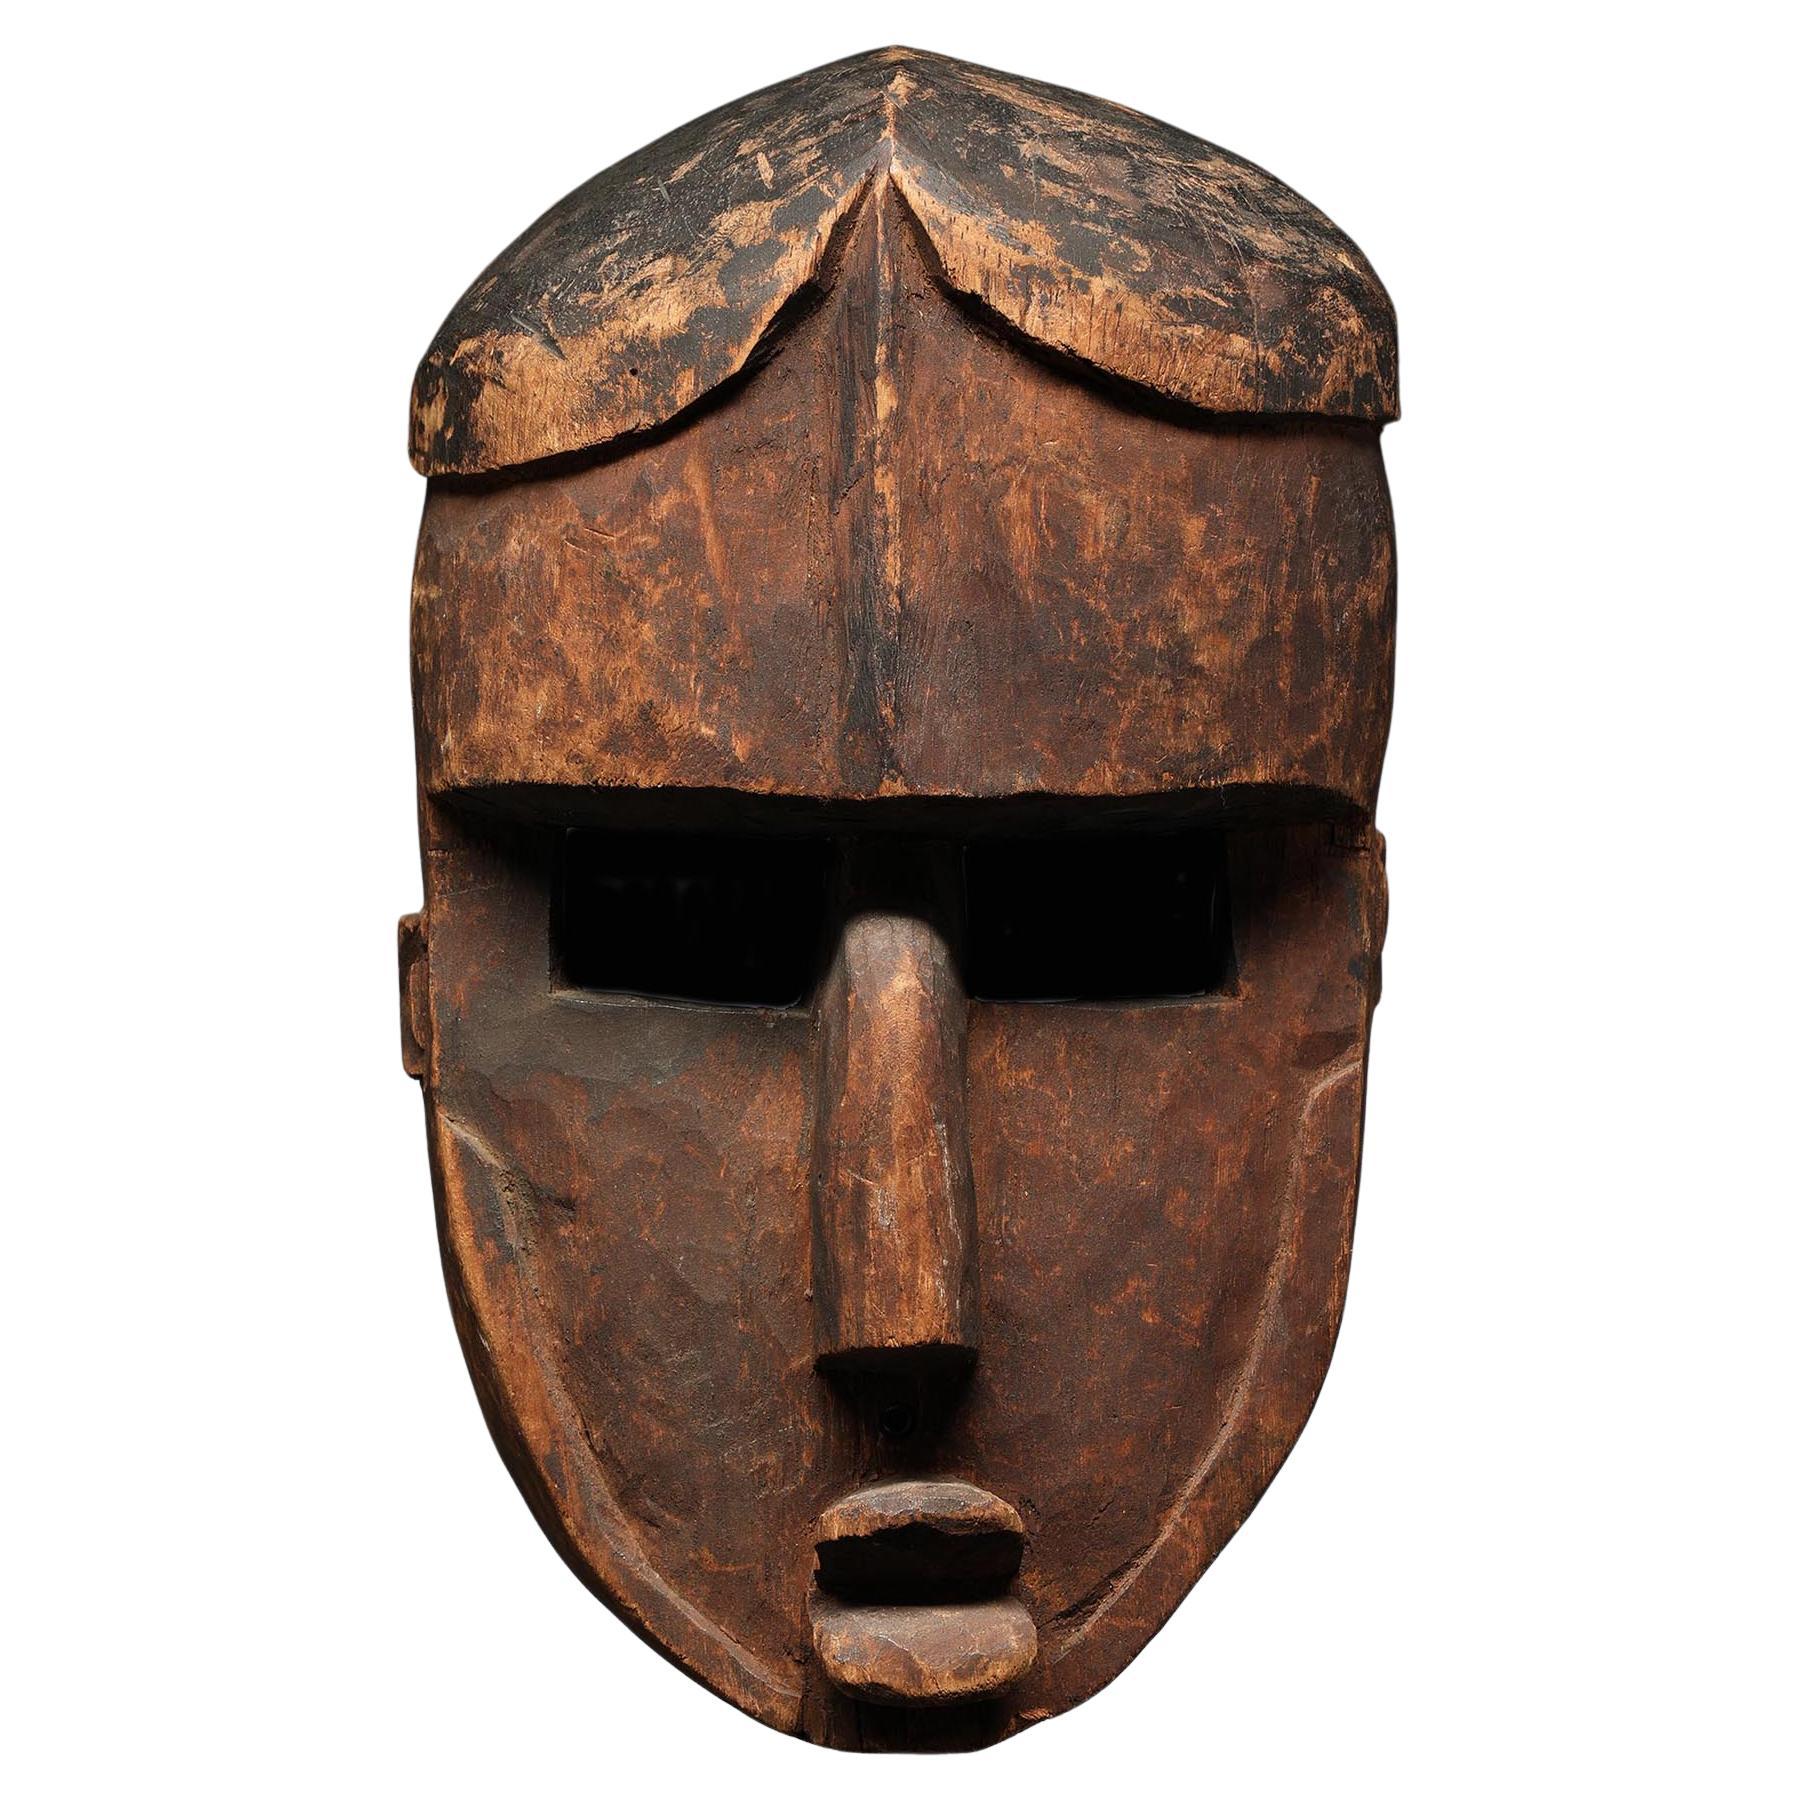 Strong Cubist Lwalwa Mask DRC Congo Zaire Early 20th Century Provenance